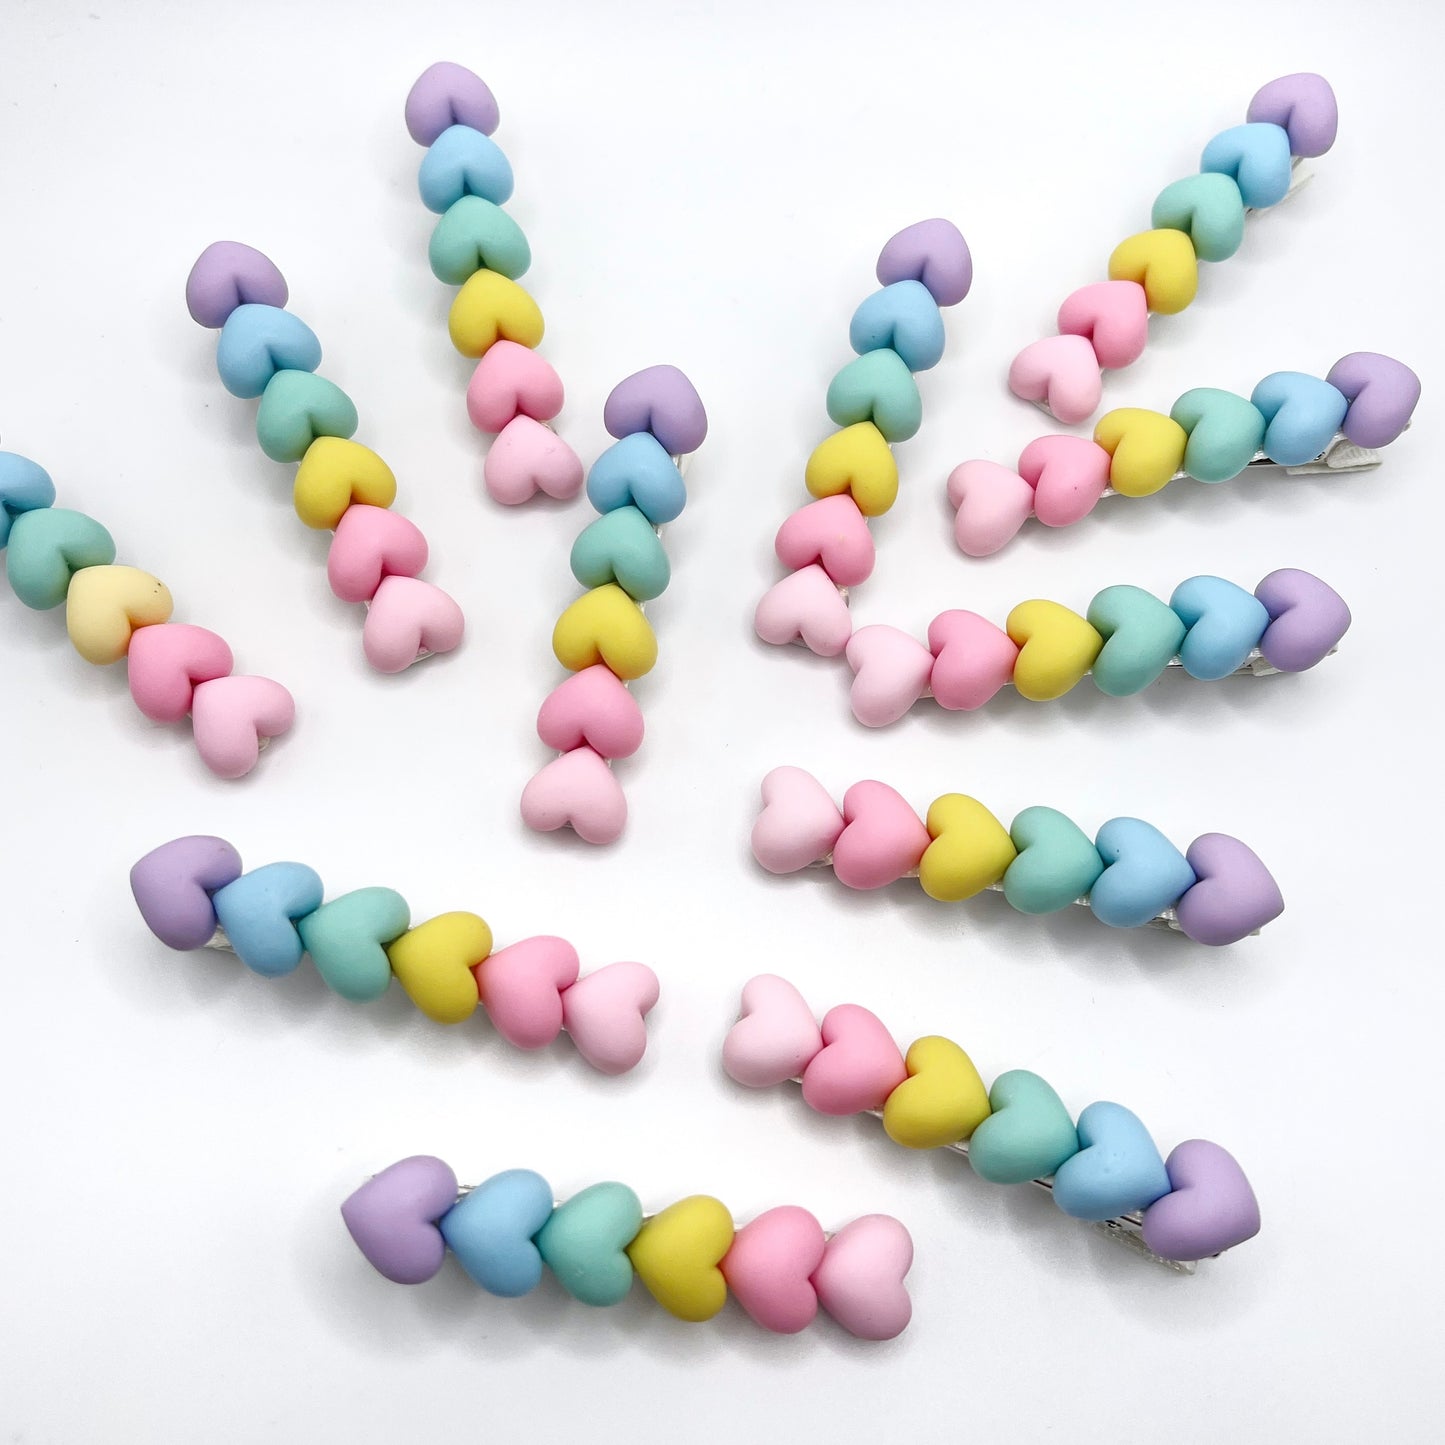 Pastel Ever hearts